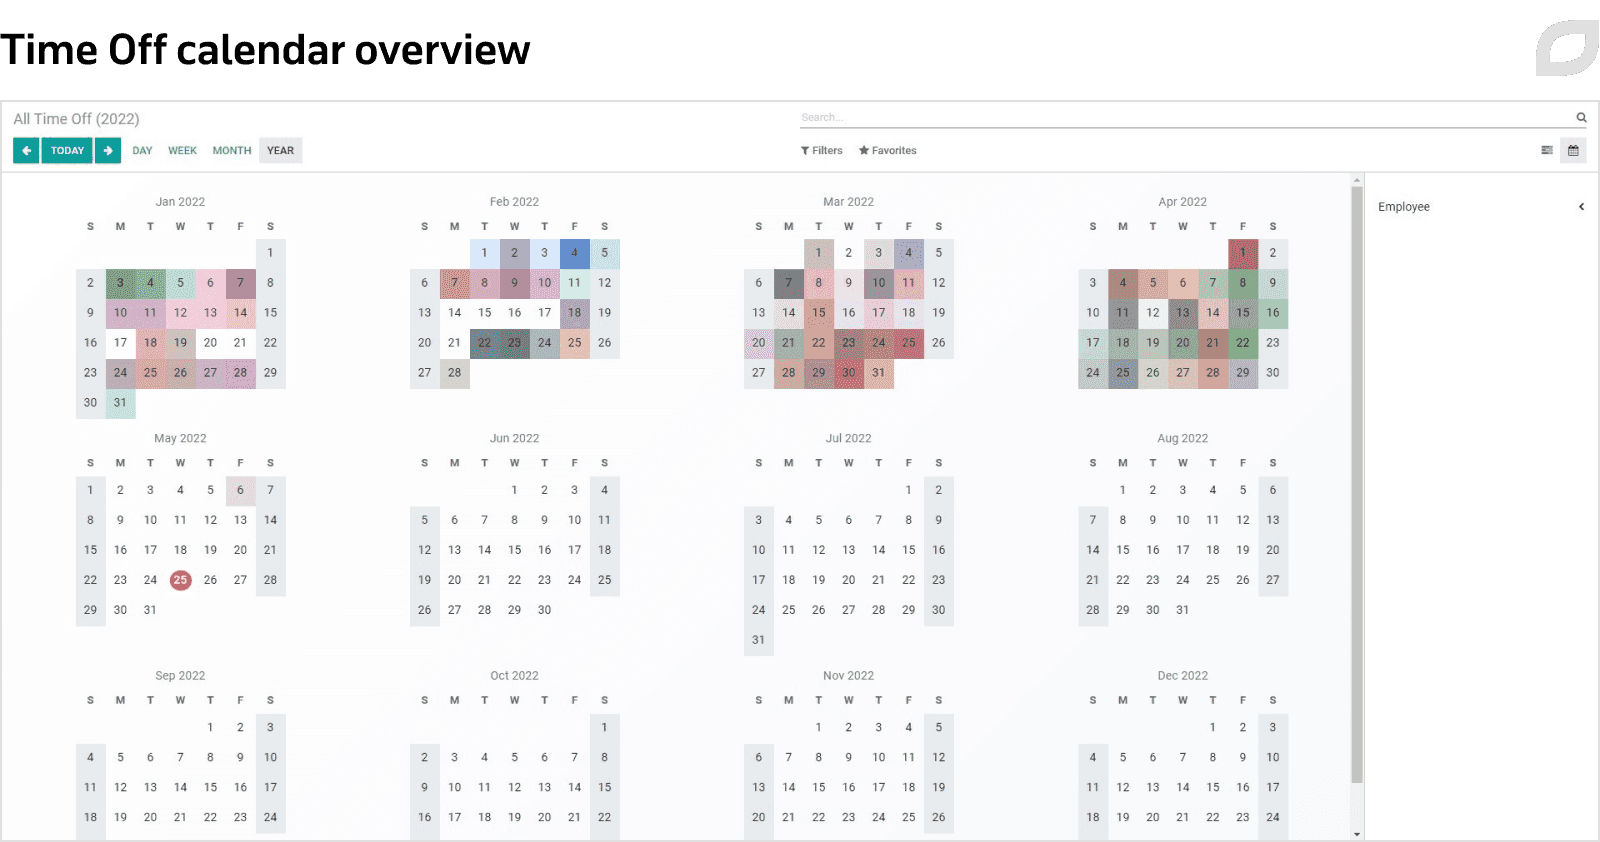 Time Off calendar overview